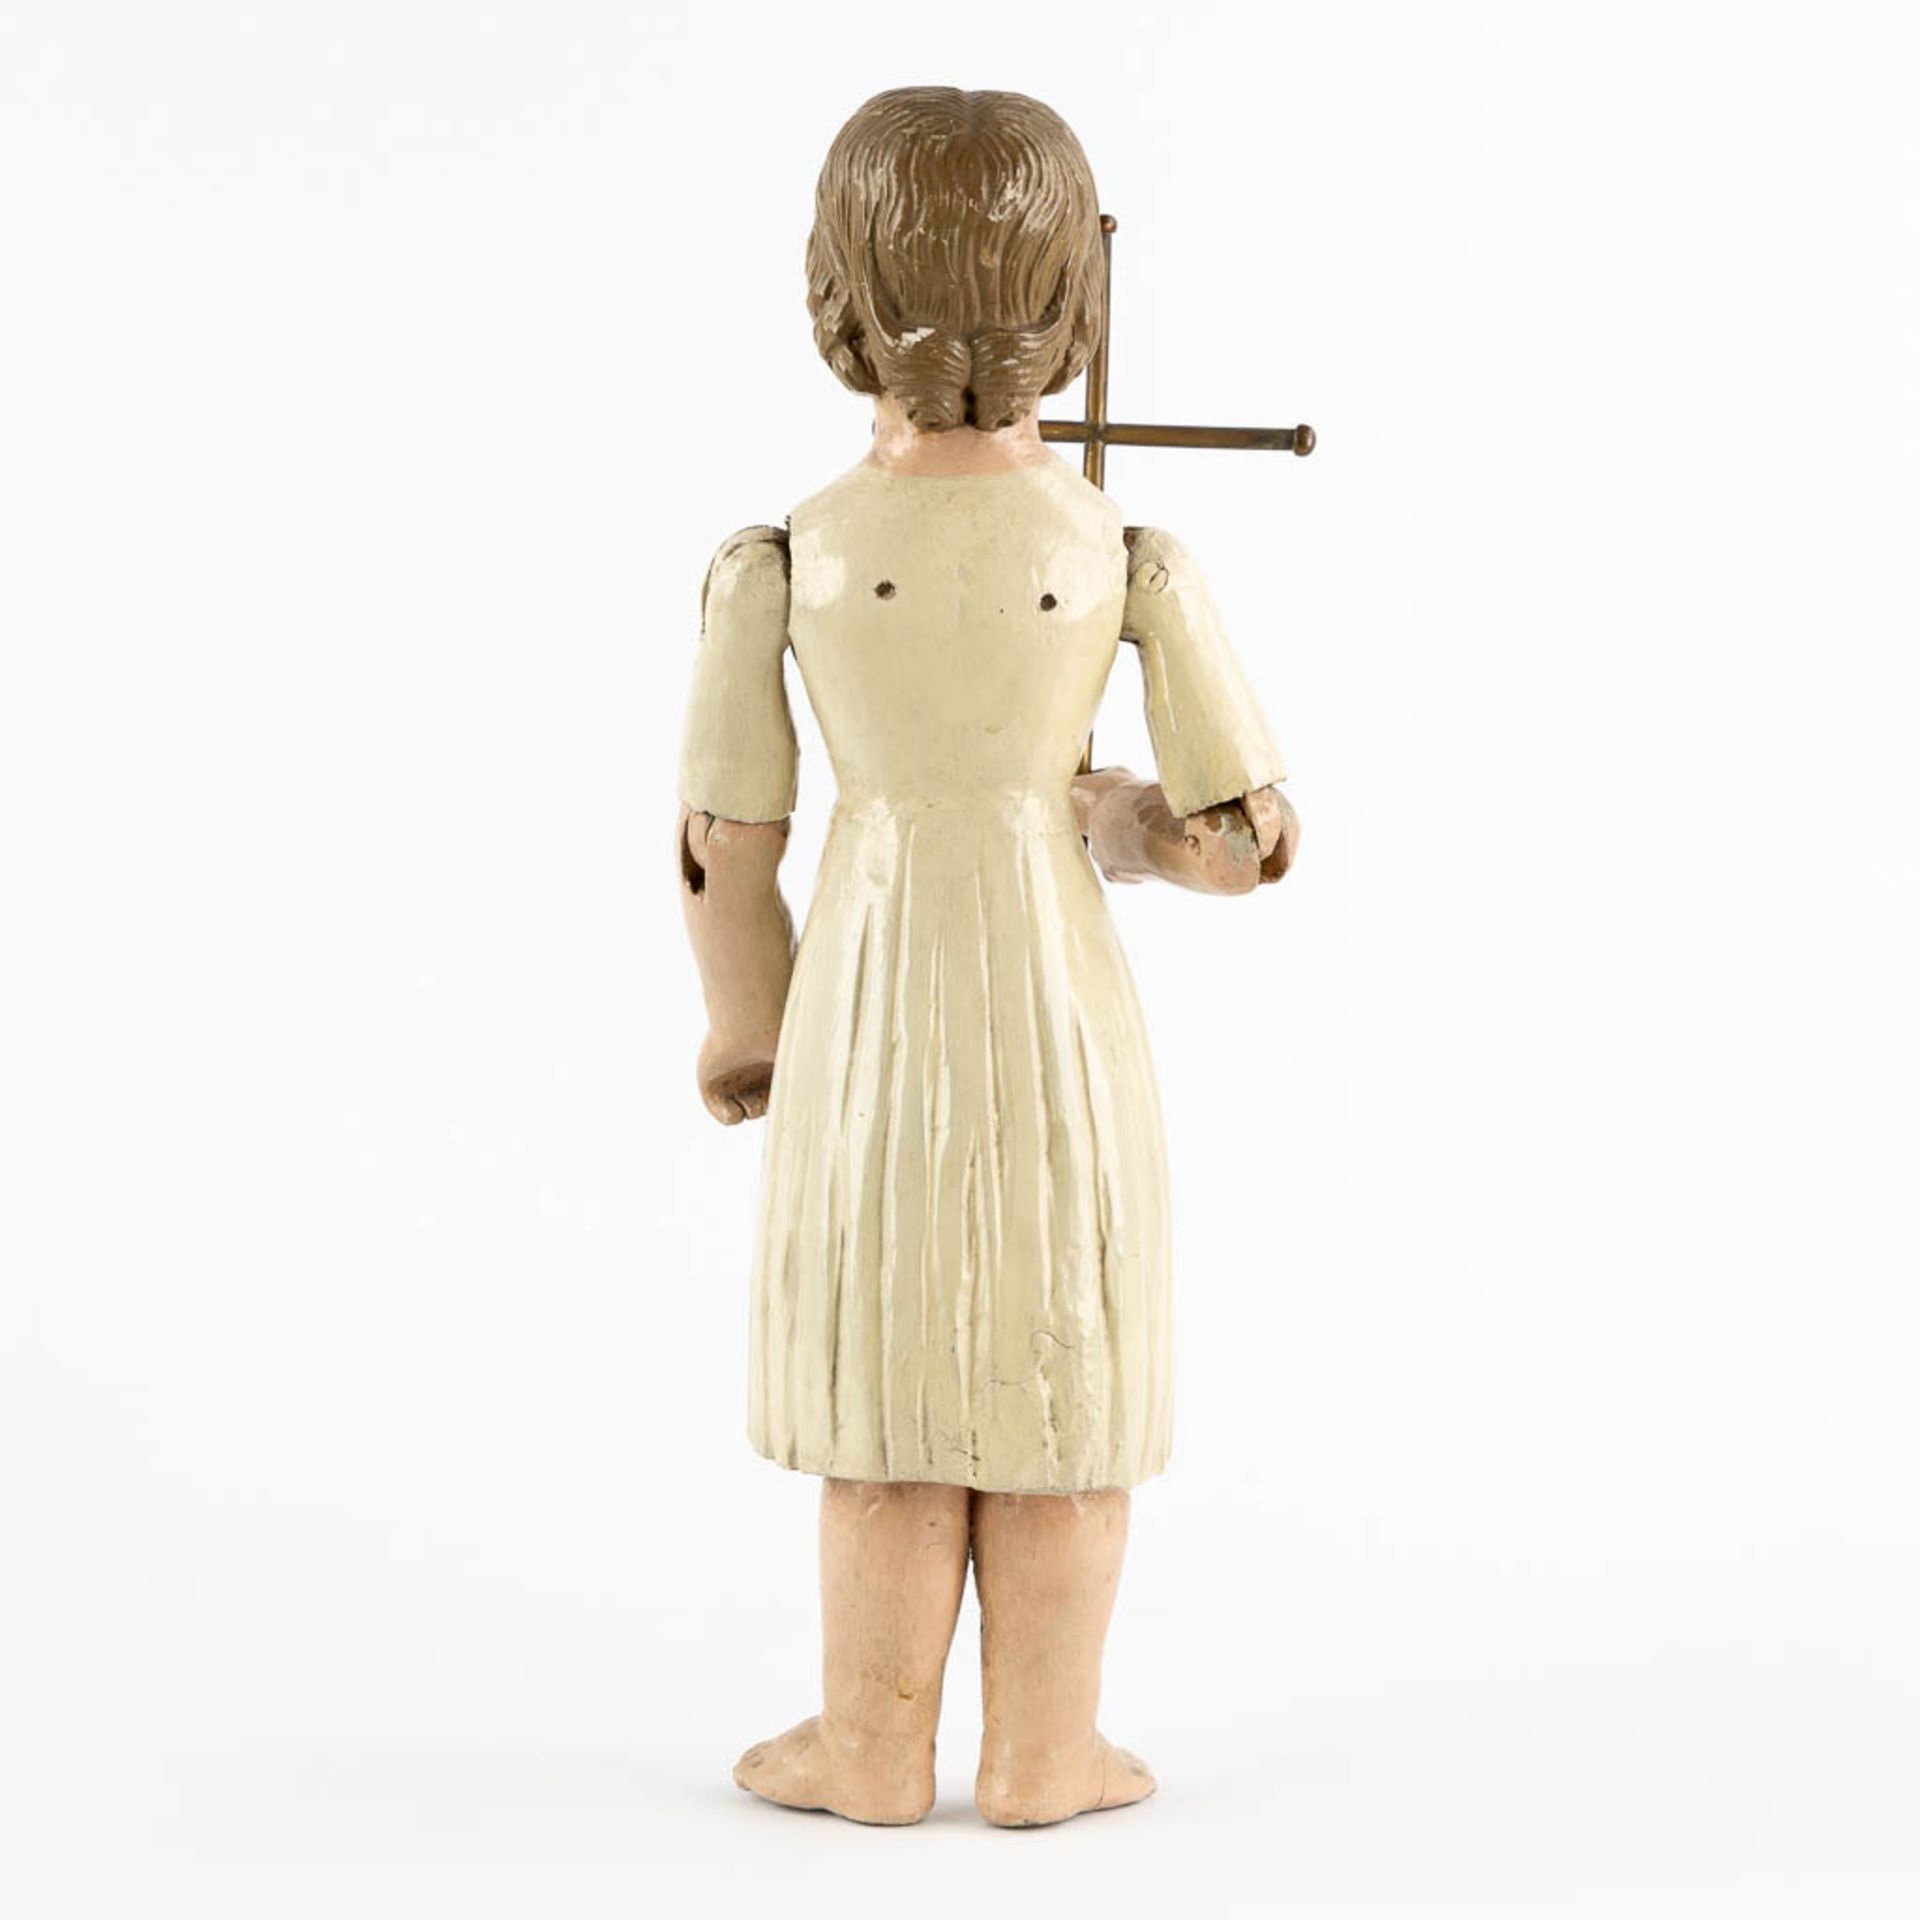 An antique patinated and wood-sculptured doll. 19th C. (L:11,5 x W:17 x H:45 cm) - Image 6 of 12